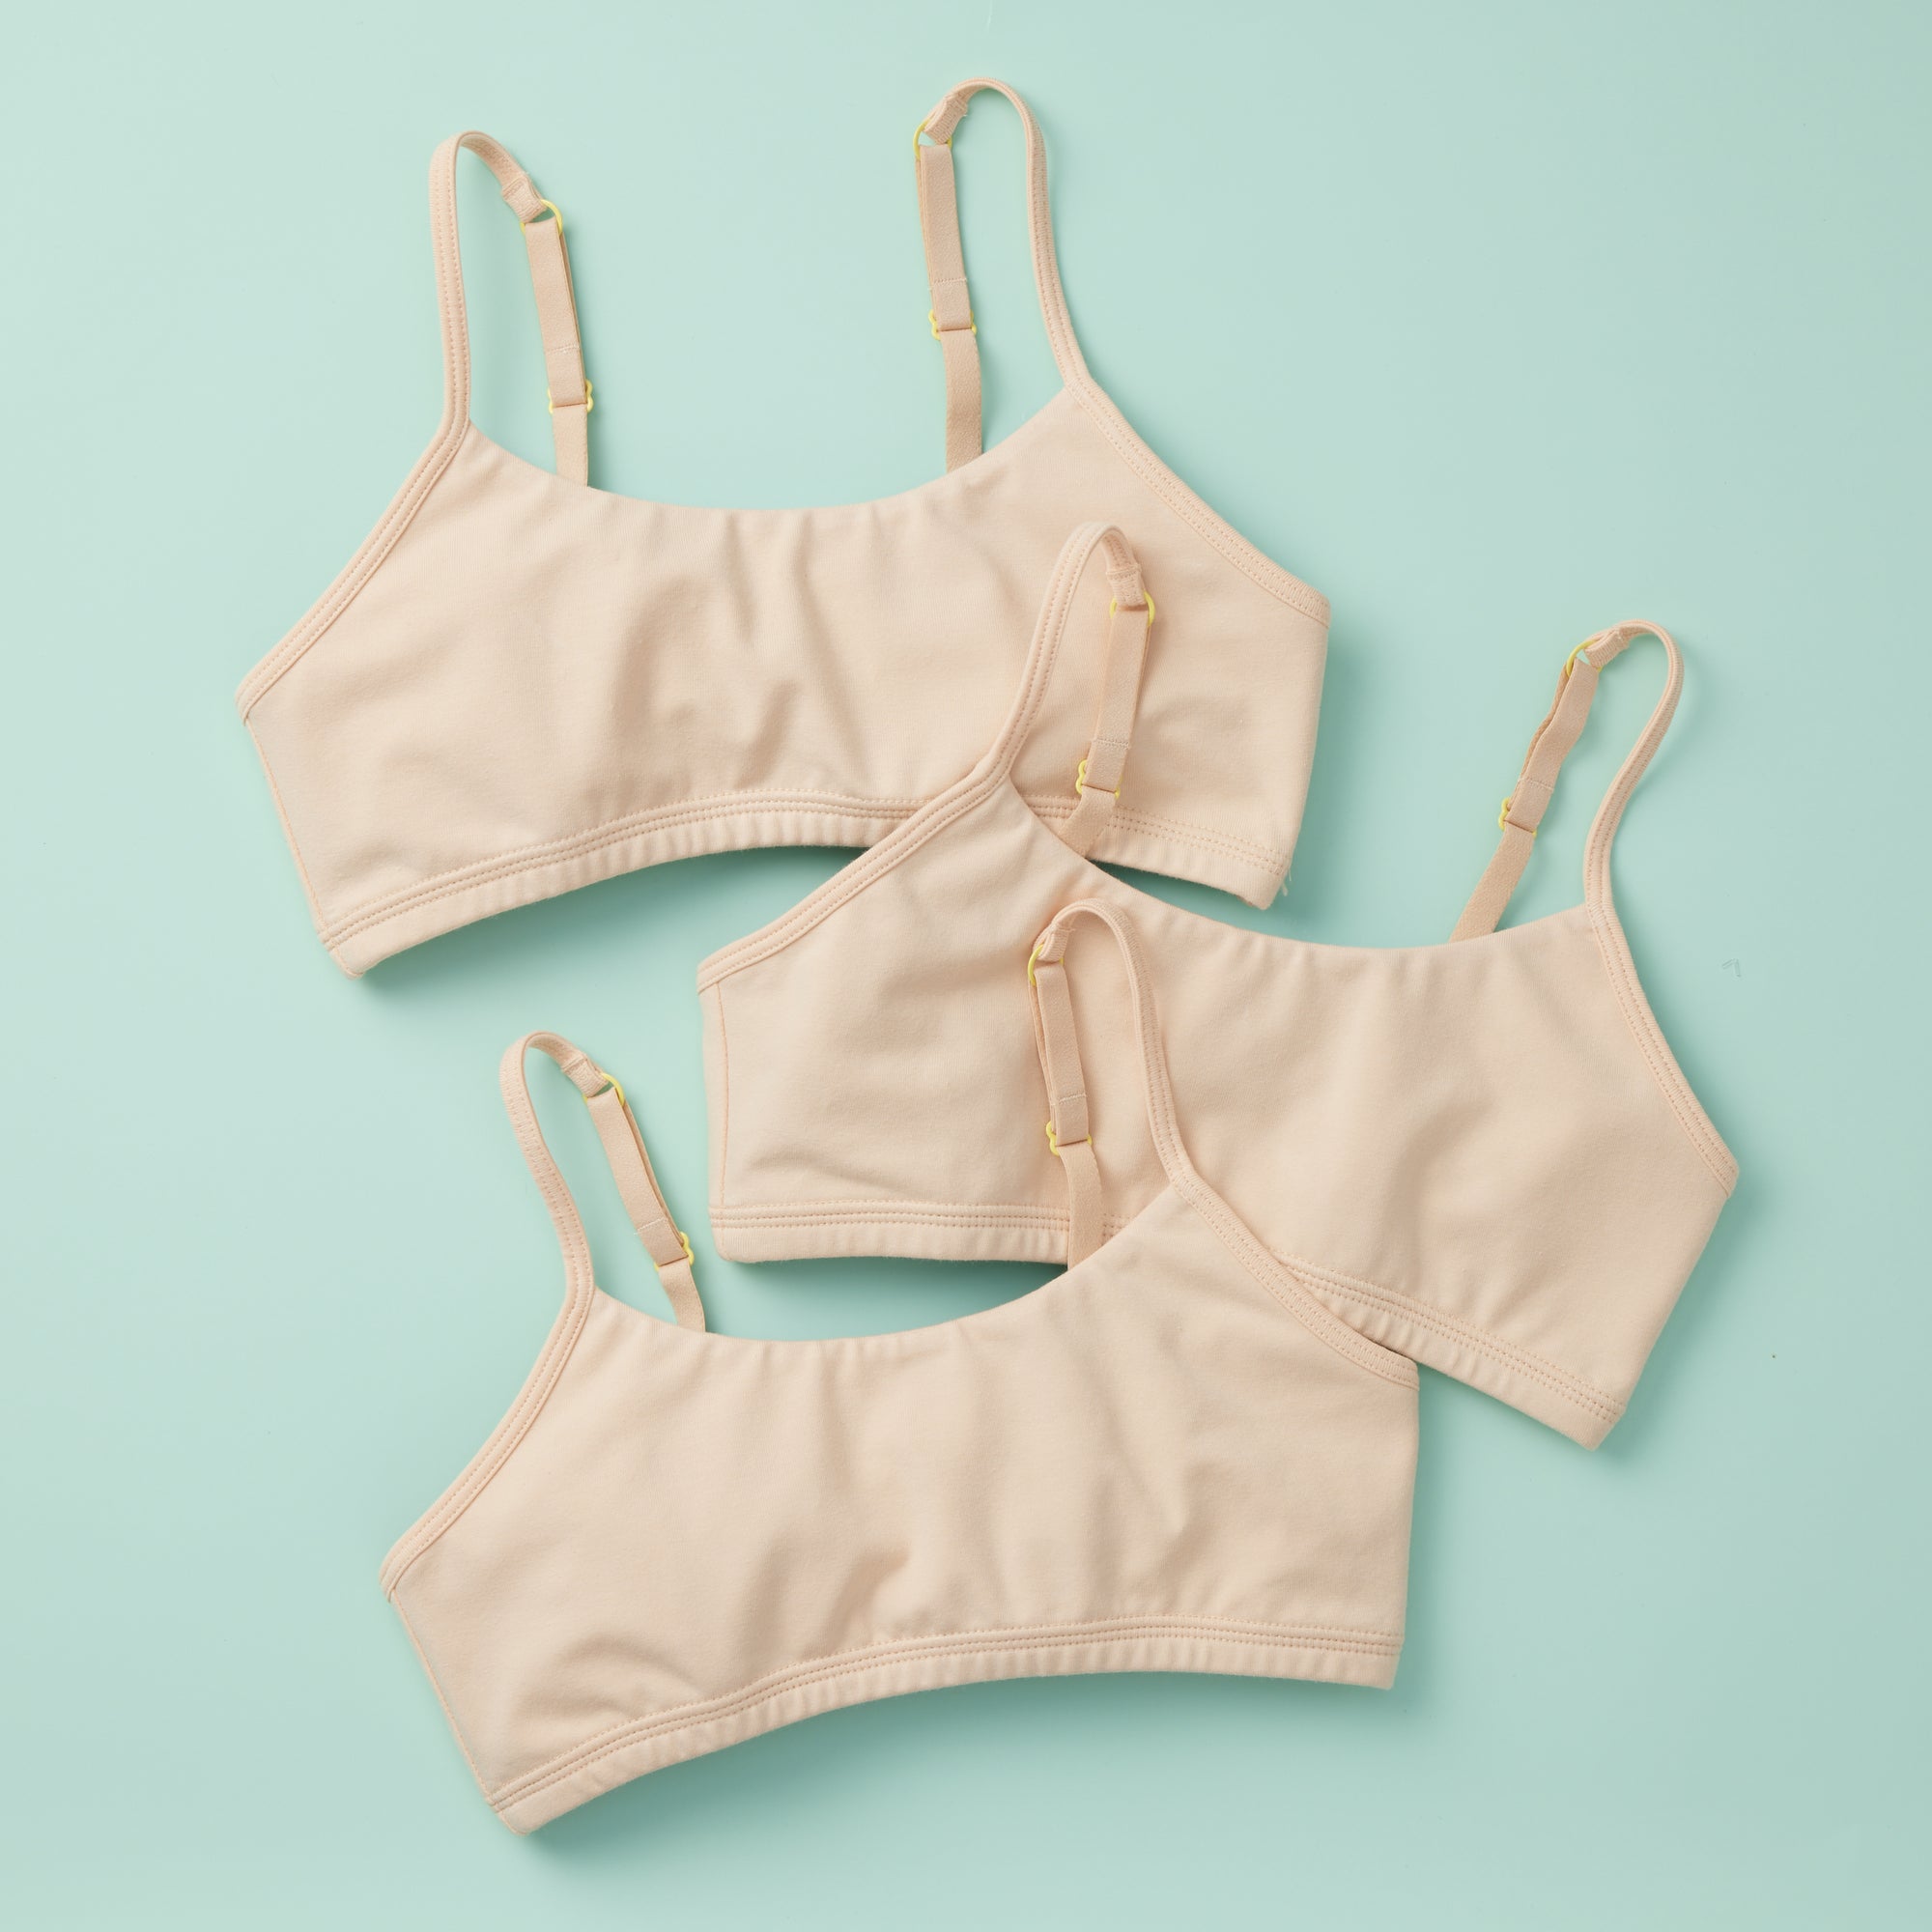 Original Yellowberry Training Starter Bra for girls.  A softest pima cotton for sensitive skin.  The best quality full coverage bra with no padding bralette for tweens.